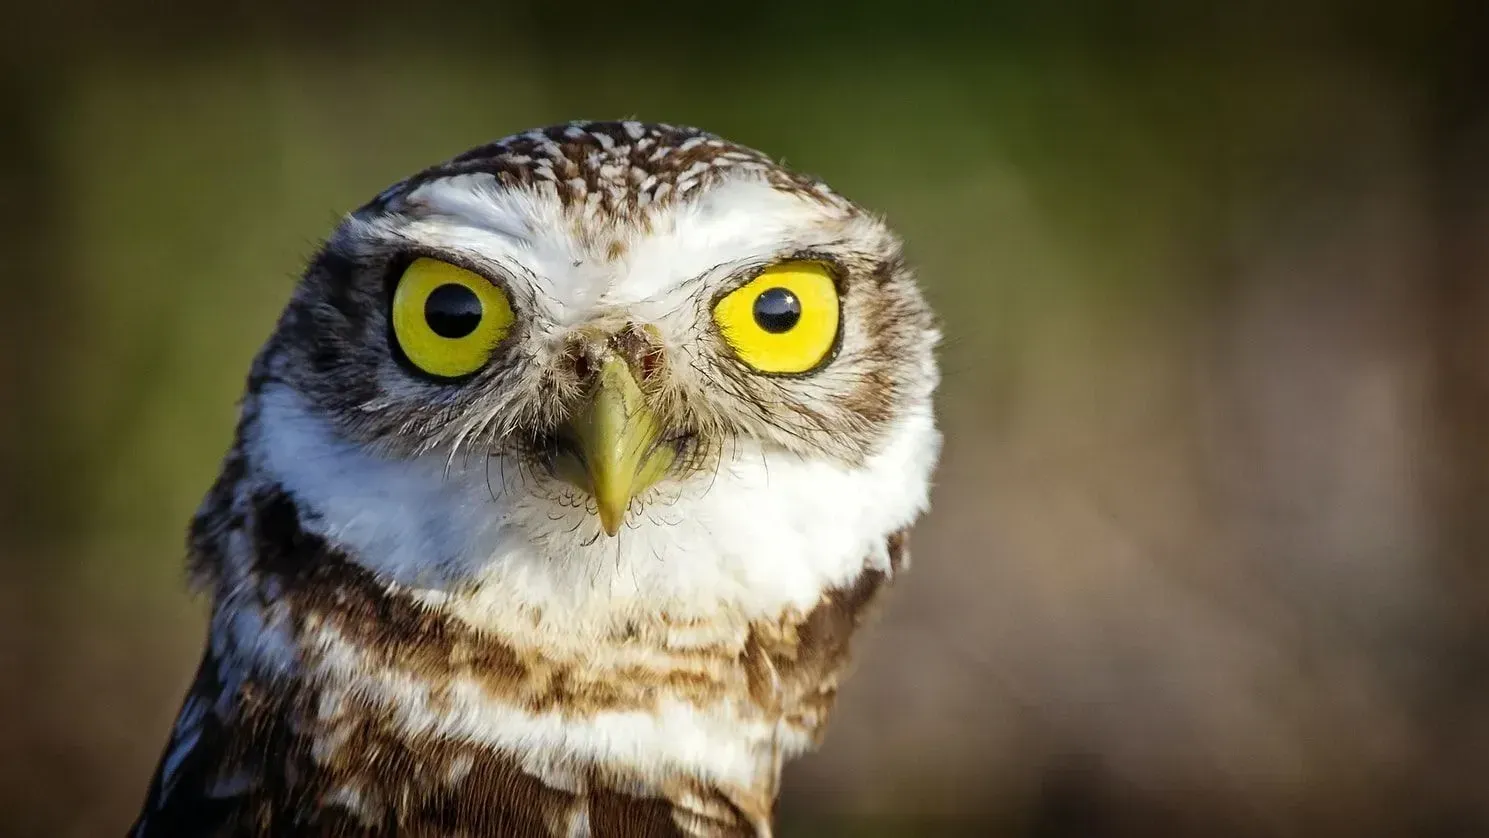 Burrowing owls are one of the smallest owls in North America.